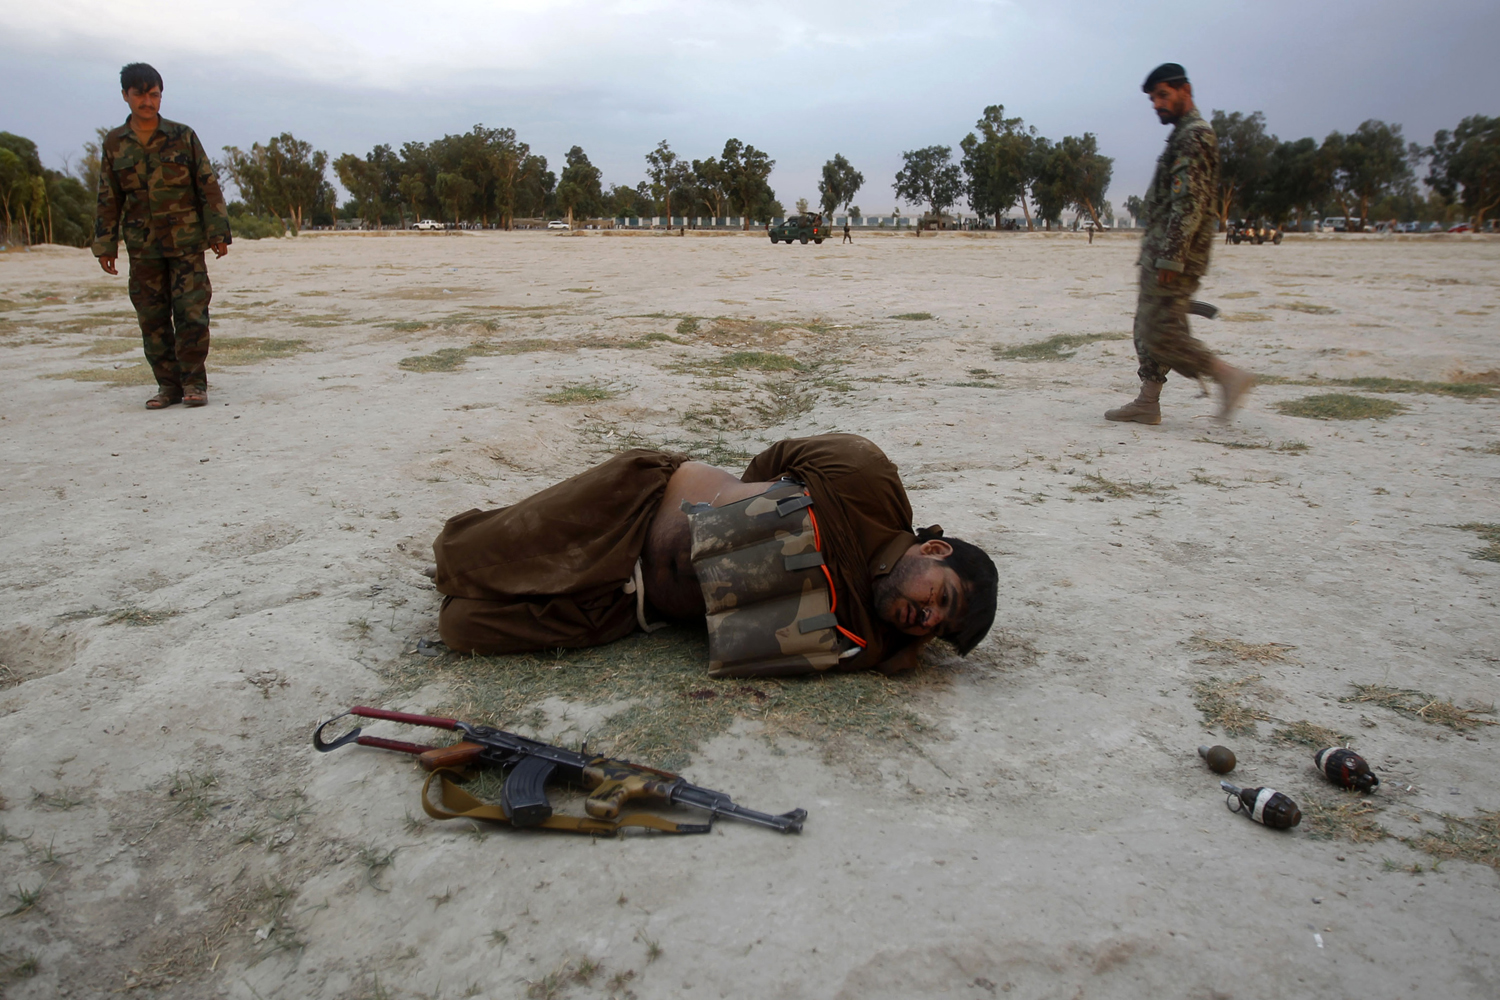 Afghan National Army (ANA) soldiers approach a suicide attacker after his vest was defused in Jalalabad province